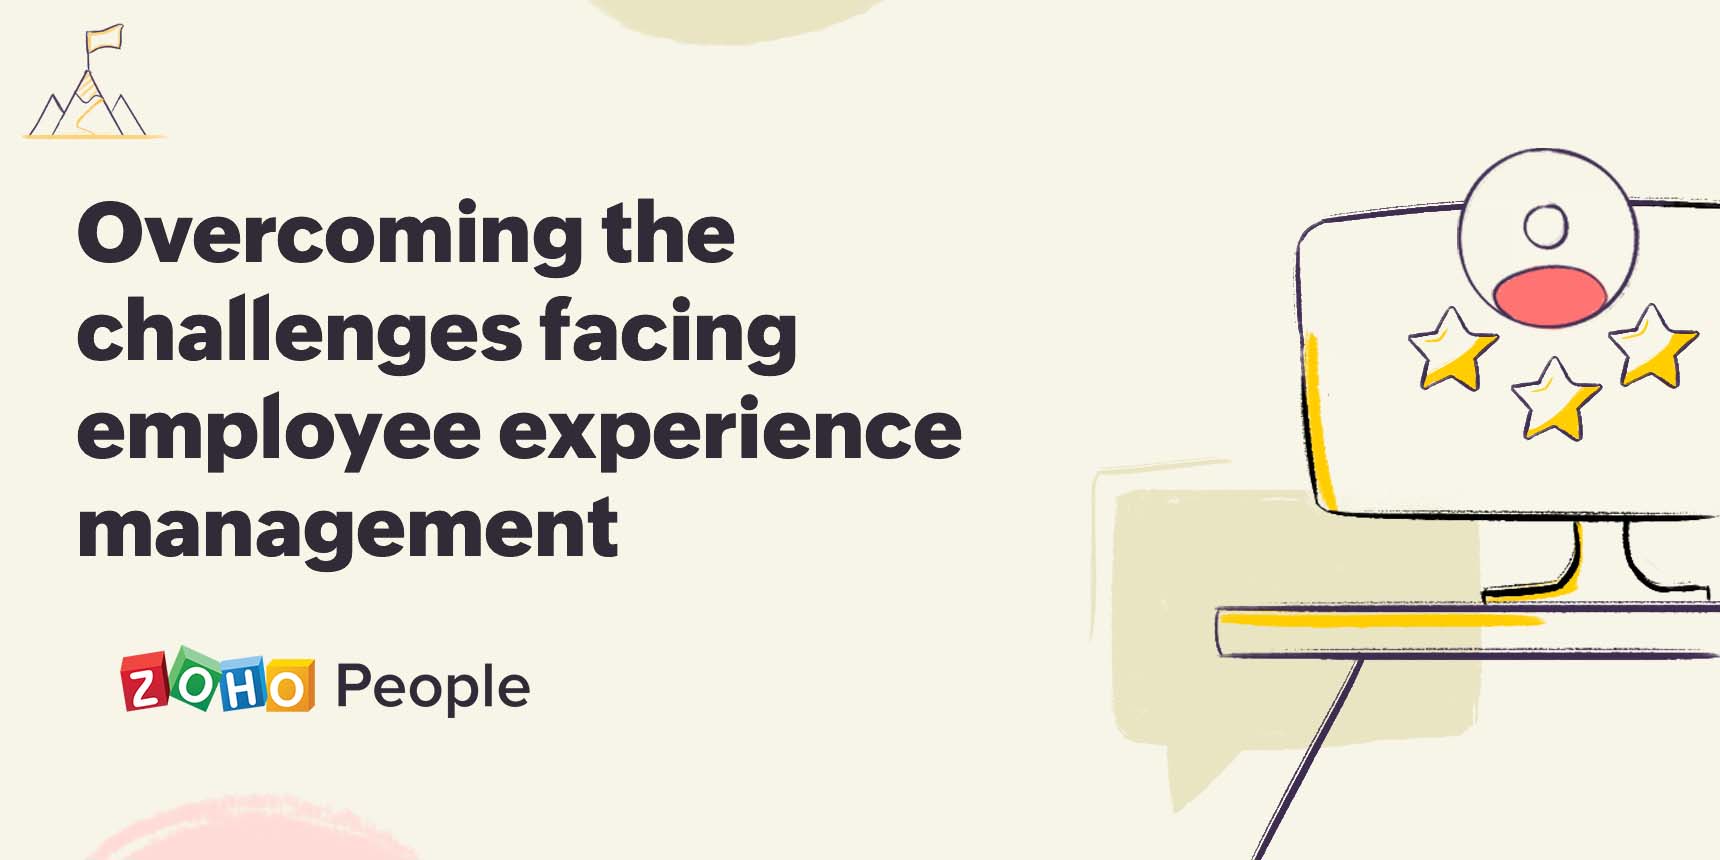 Overcoming the challenges facing employee experience management